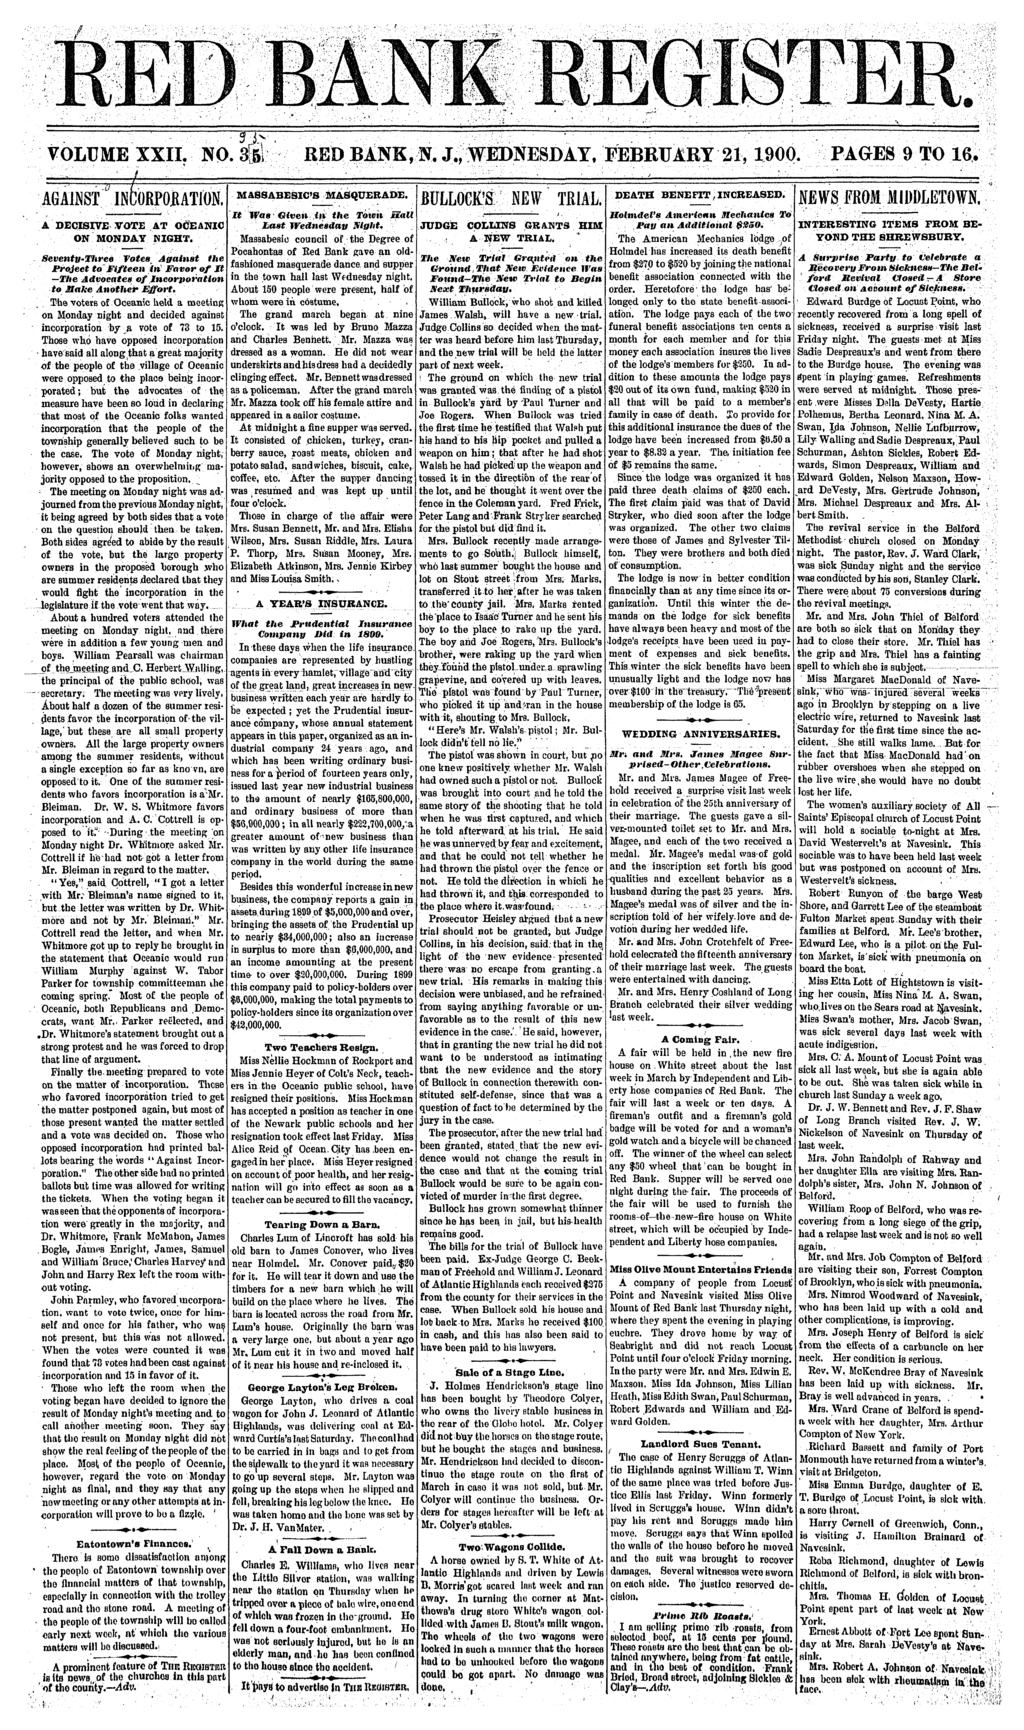 ANE VOLUME XXL NO. 35i RED BANK, N. J., WEDNESDAY, FEBRUARY 21, 1900. PAGES 9 O 16. AGANS A DECSVE VOE A OCEANC ON MONDAY NGH.